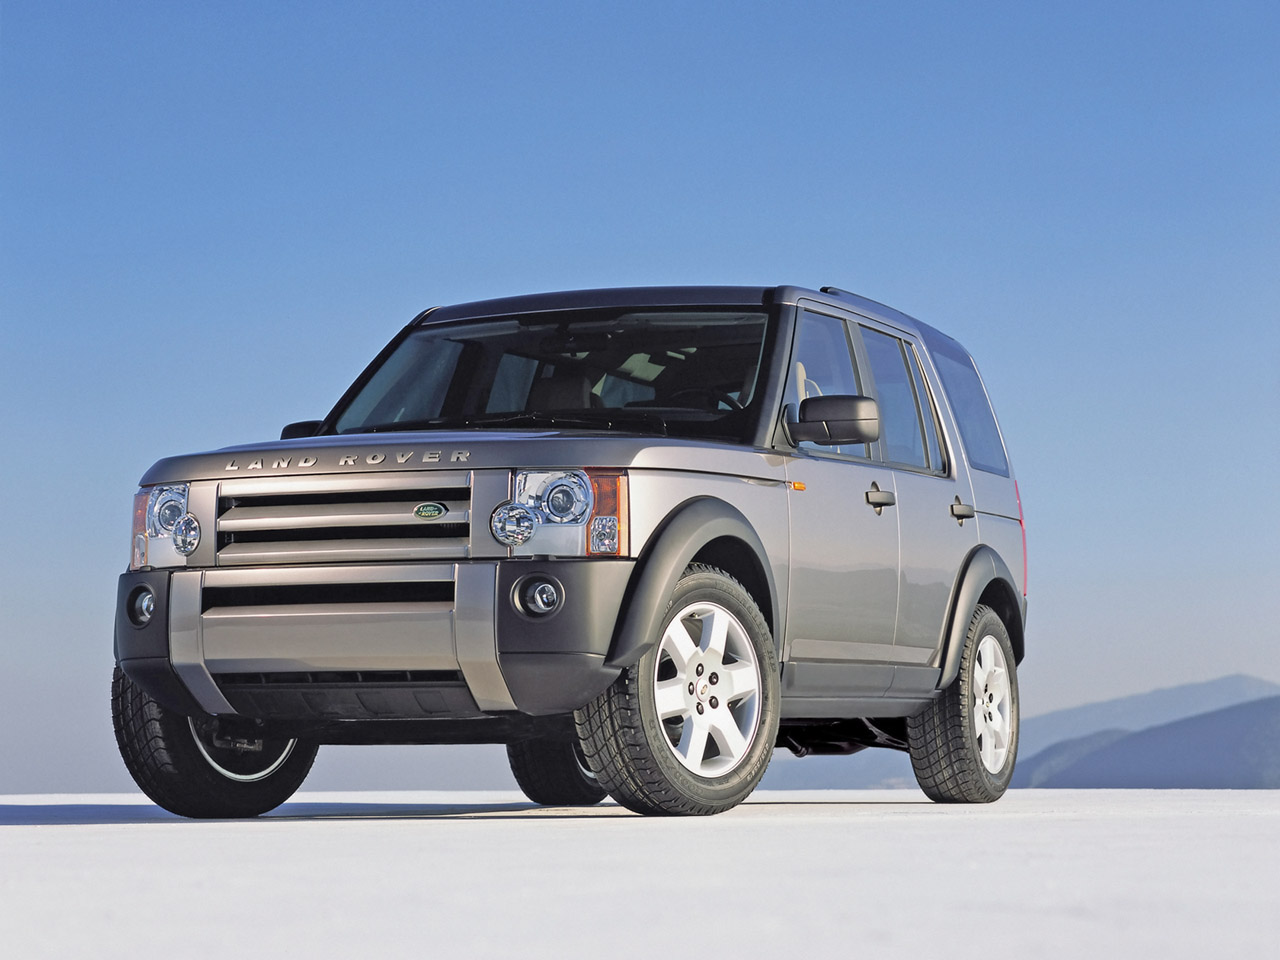 Discovery Car Wallpaper Download